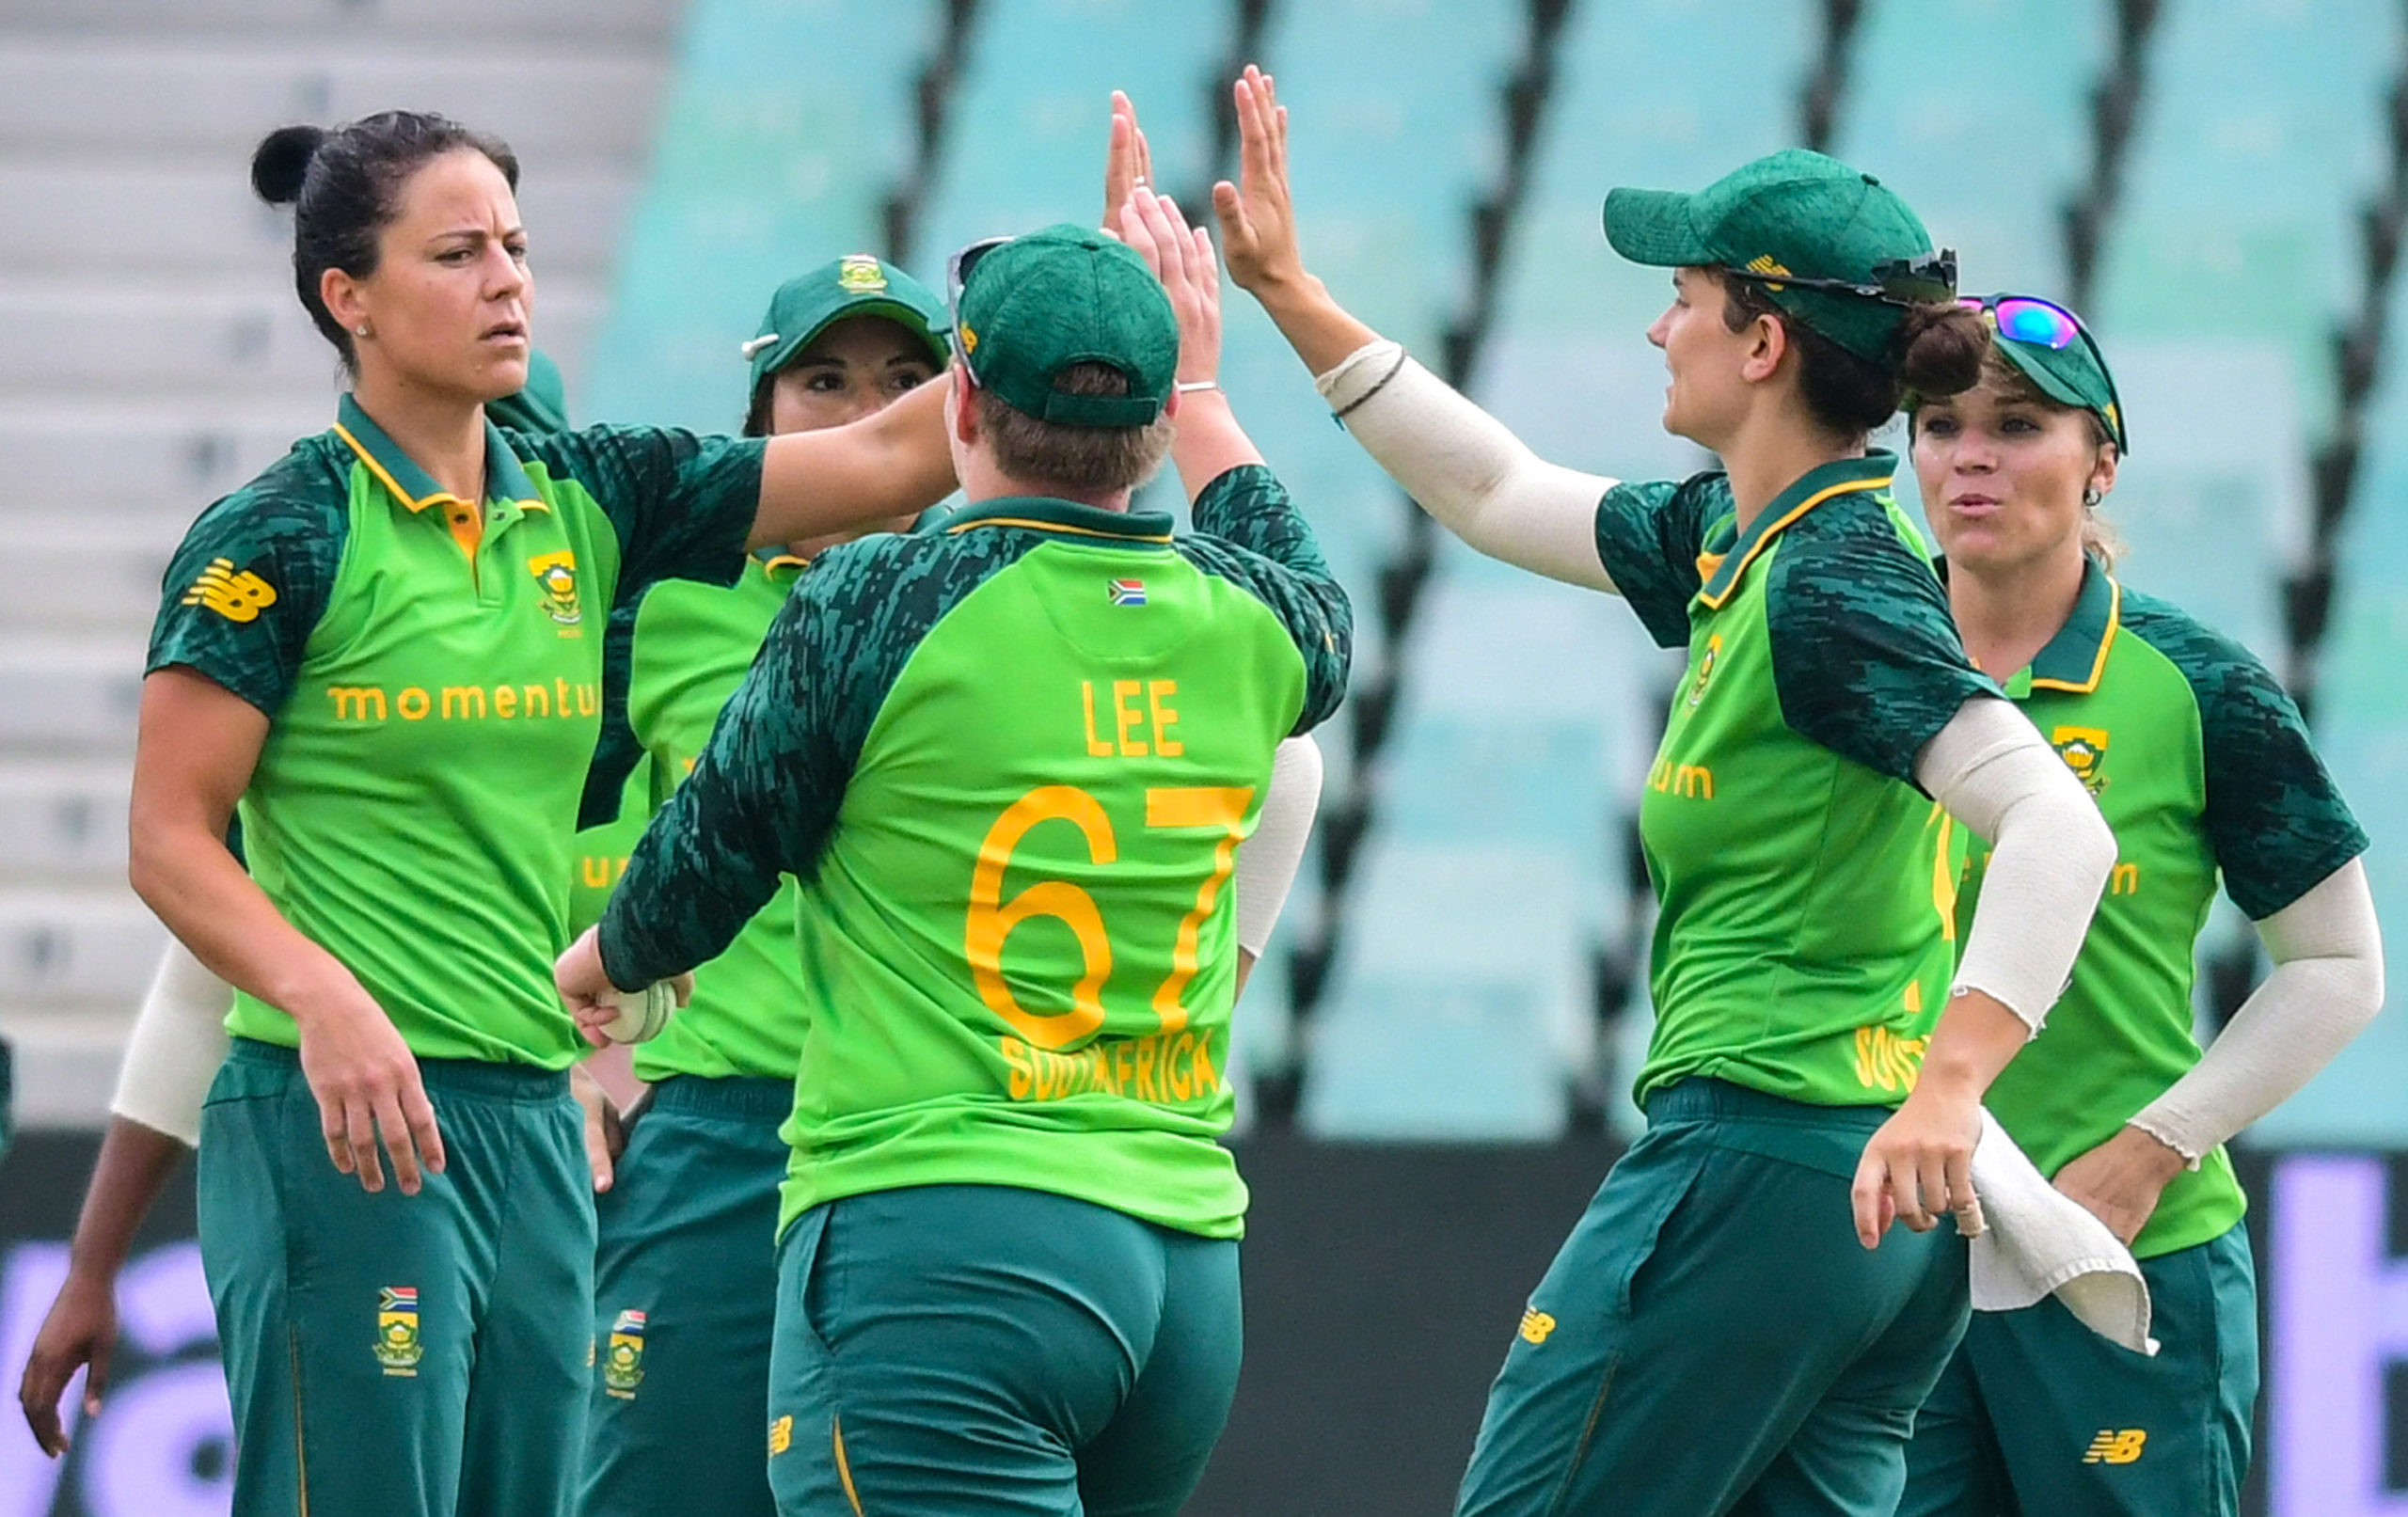 Proteas women are a formidable side with an eye on conquering the world